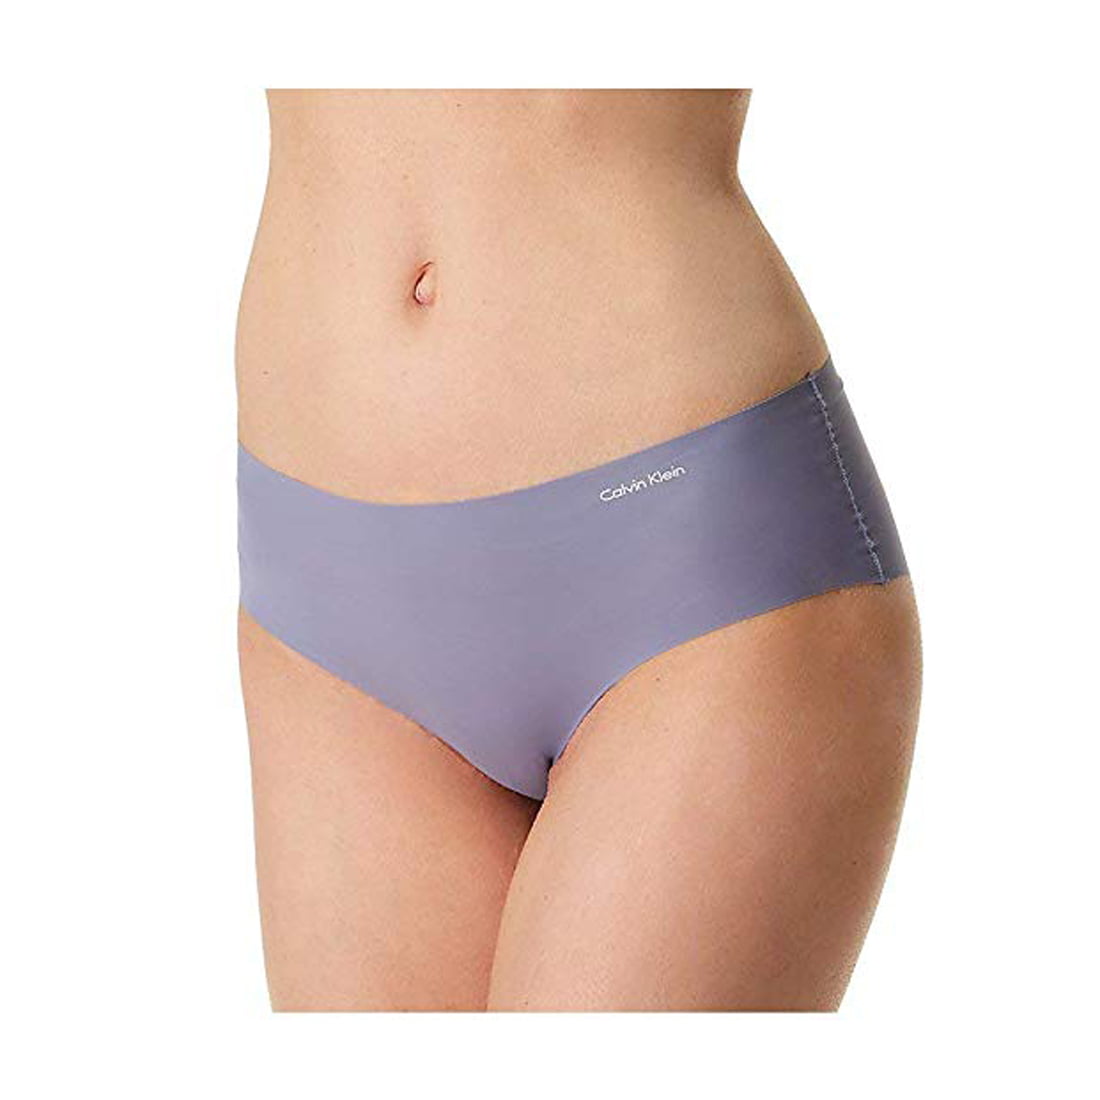 Calvin Klein Women's Invisibles Hipster Panty, Blue Granite, Small